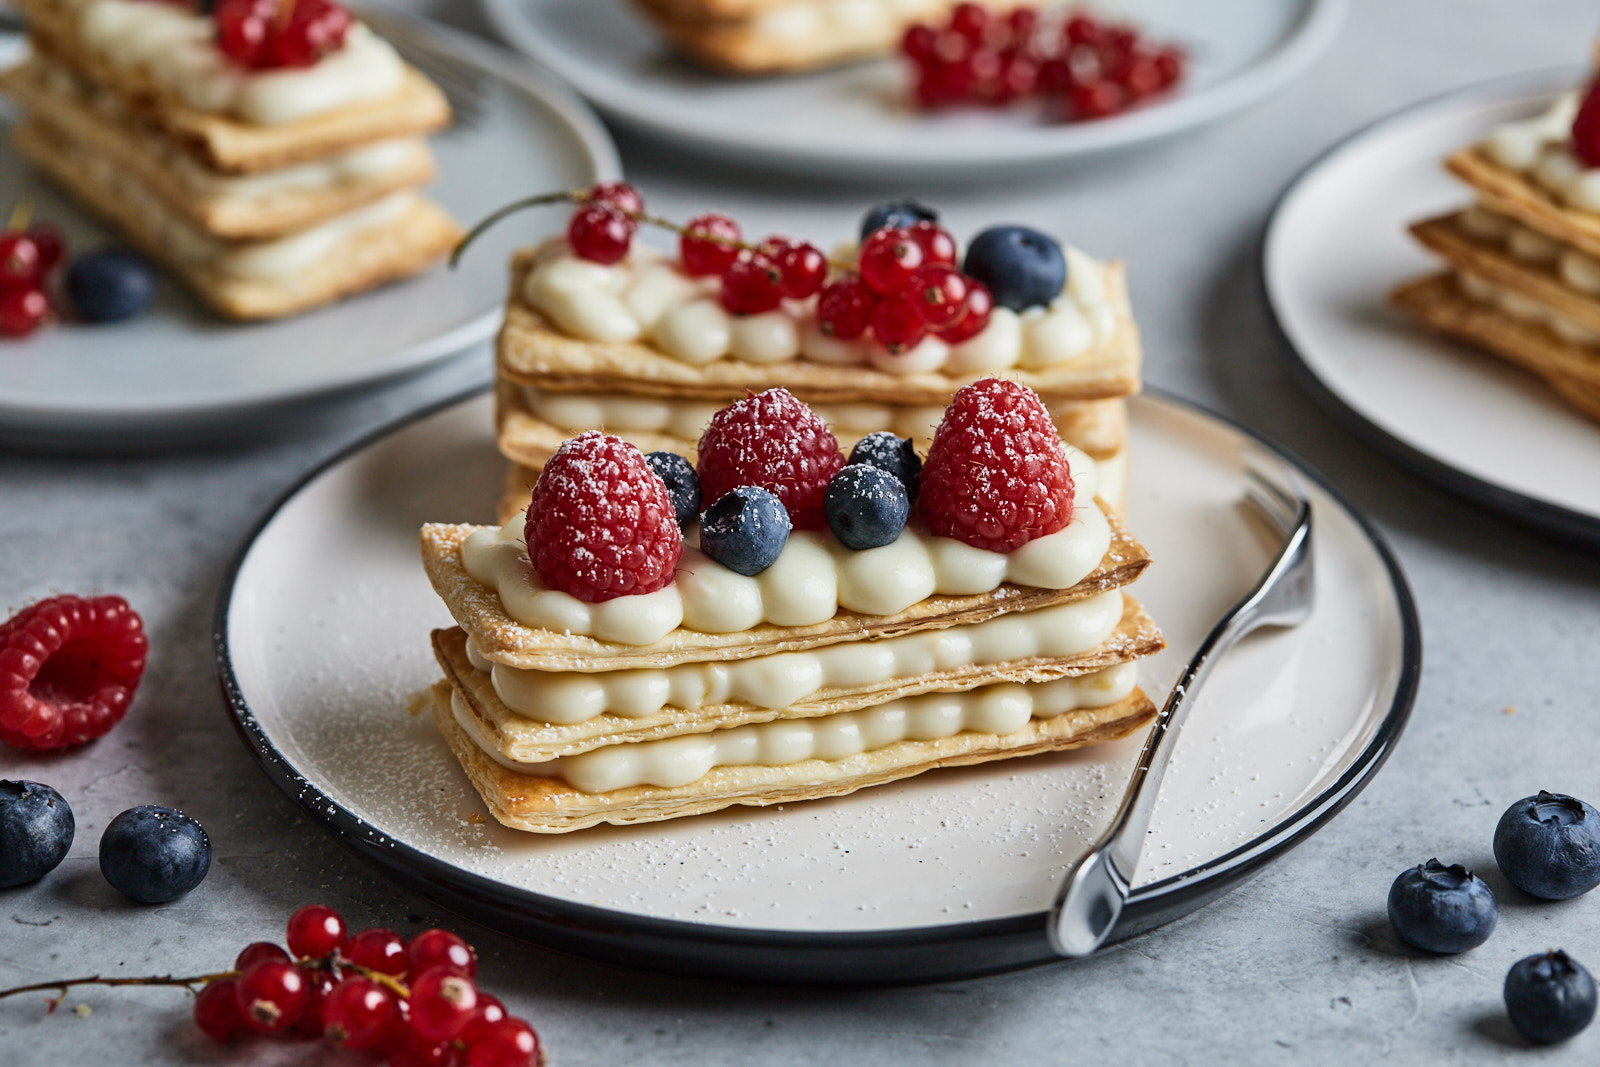 How To Make Mille Feuille 